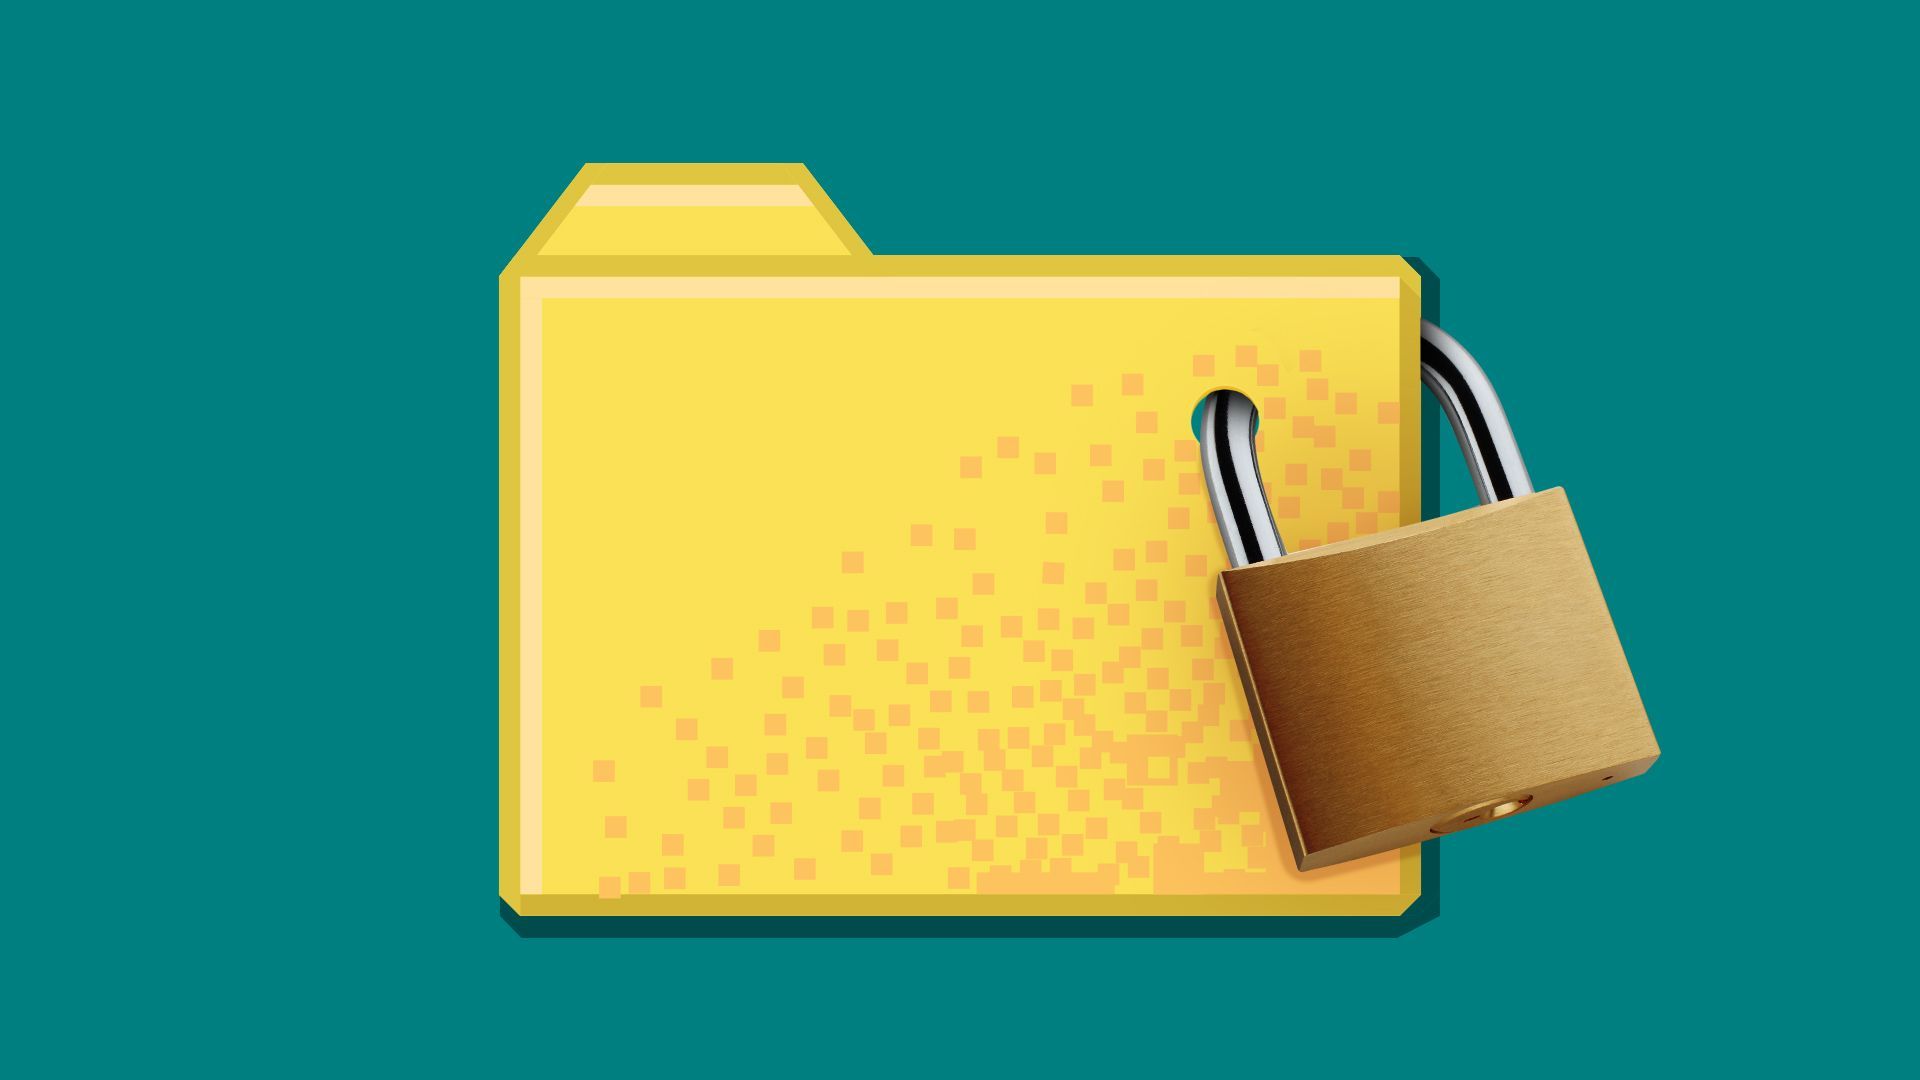 Illustration of a Windows-style folder icon with a padlock on it. 